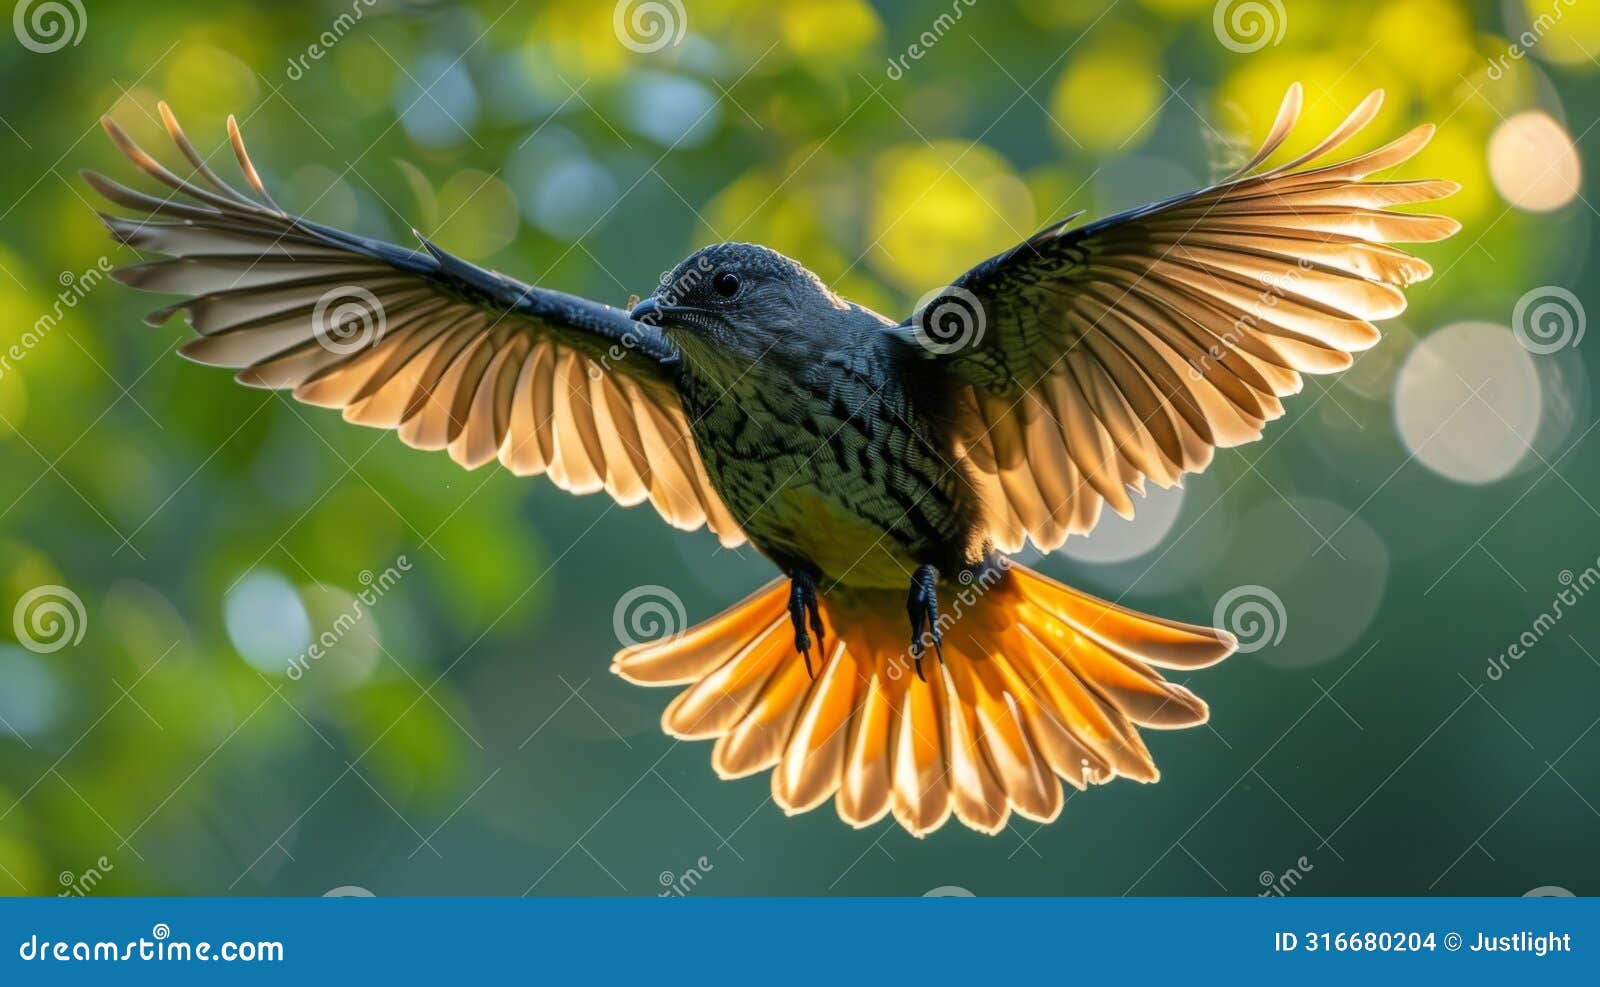 closeup of a birds wings in midflight caught in a blur of feathers as it moves through the dense tree canopy